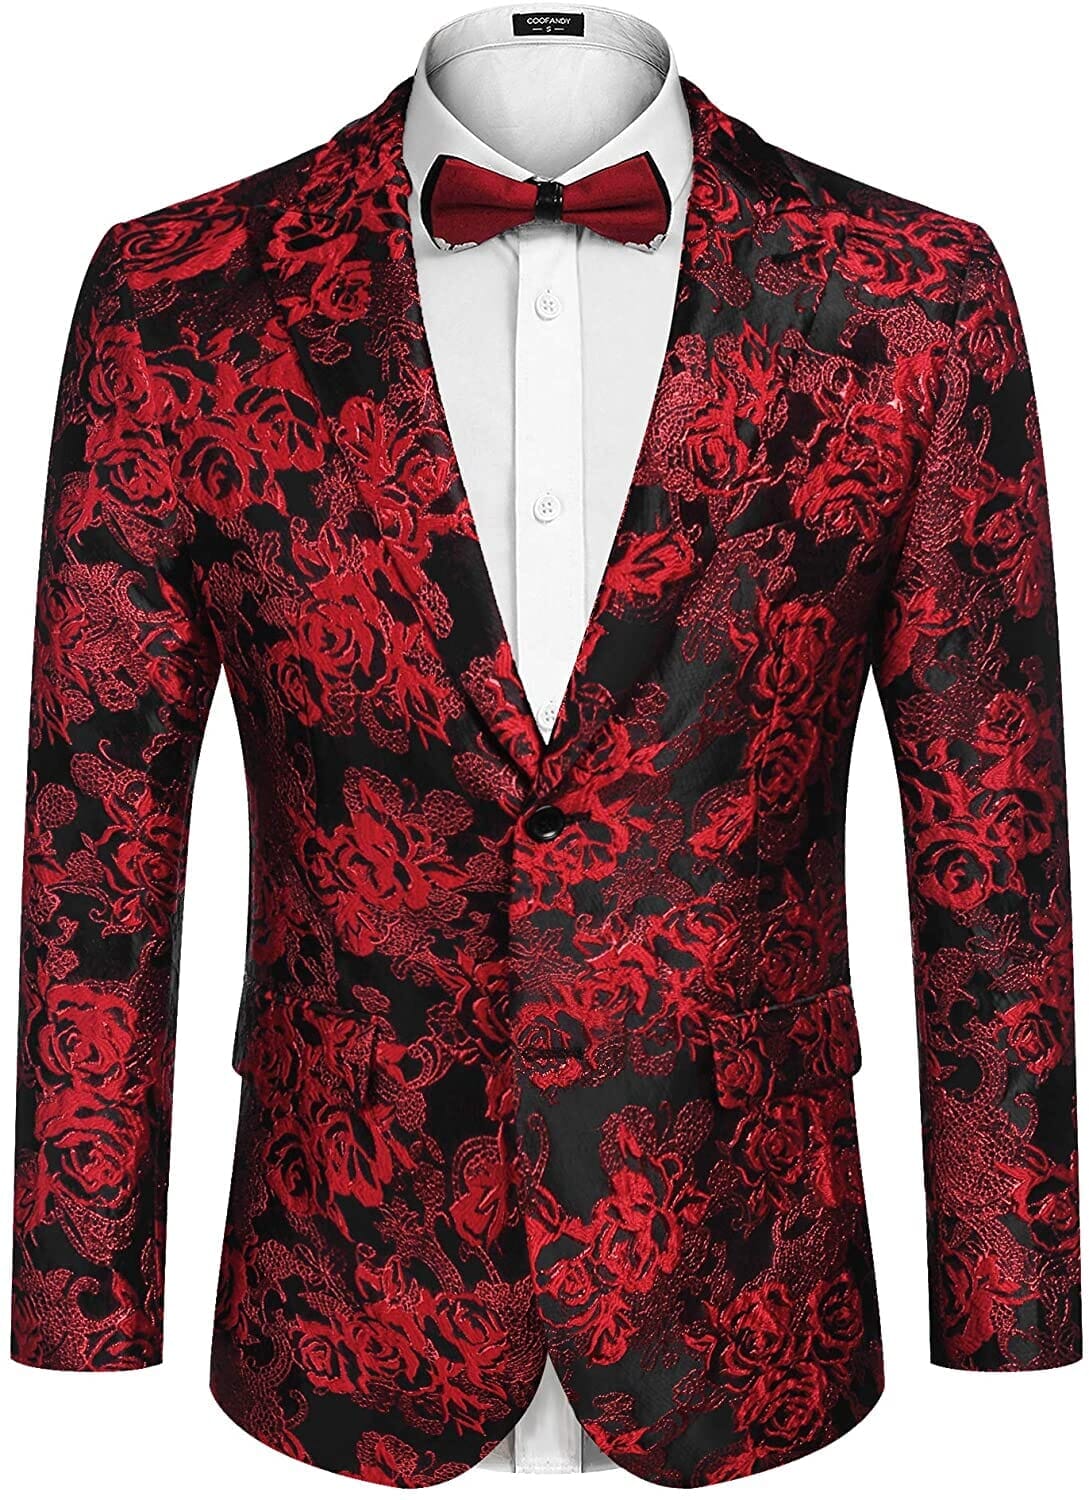 Stylish Rose Embroidered Blazer for a Classy Look | US Only – COOFANDY